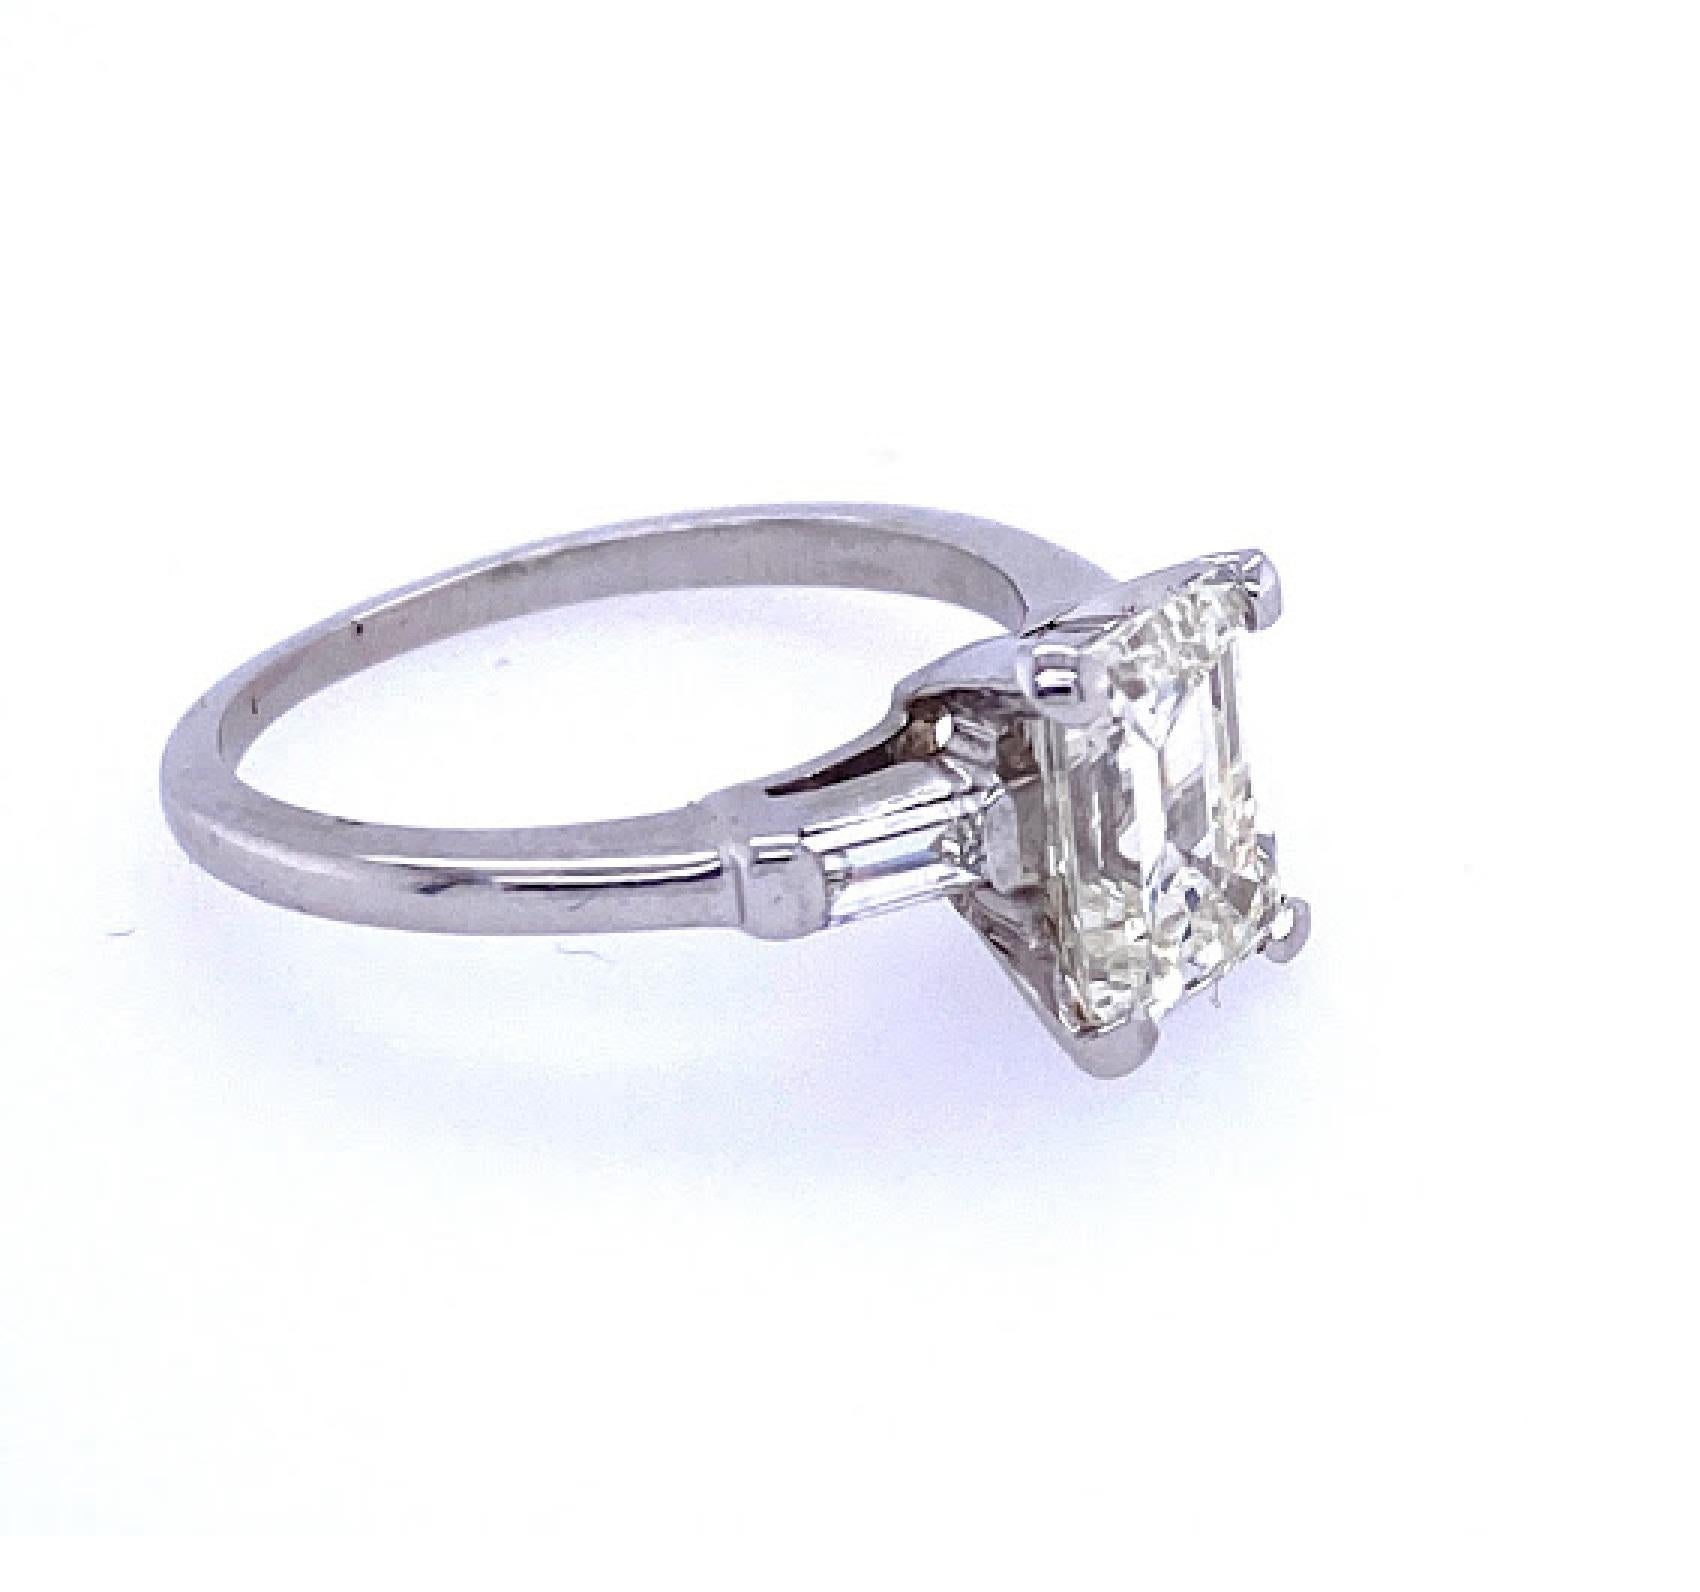  Platinum and diamond engagement ring the center stone is an emerald cut diamond weighing approximately 1.91 carats measuring 8.5x6.3mm being of color grade L and Clarity grade SI1, set in a classic basket head setting flanked by two baguette